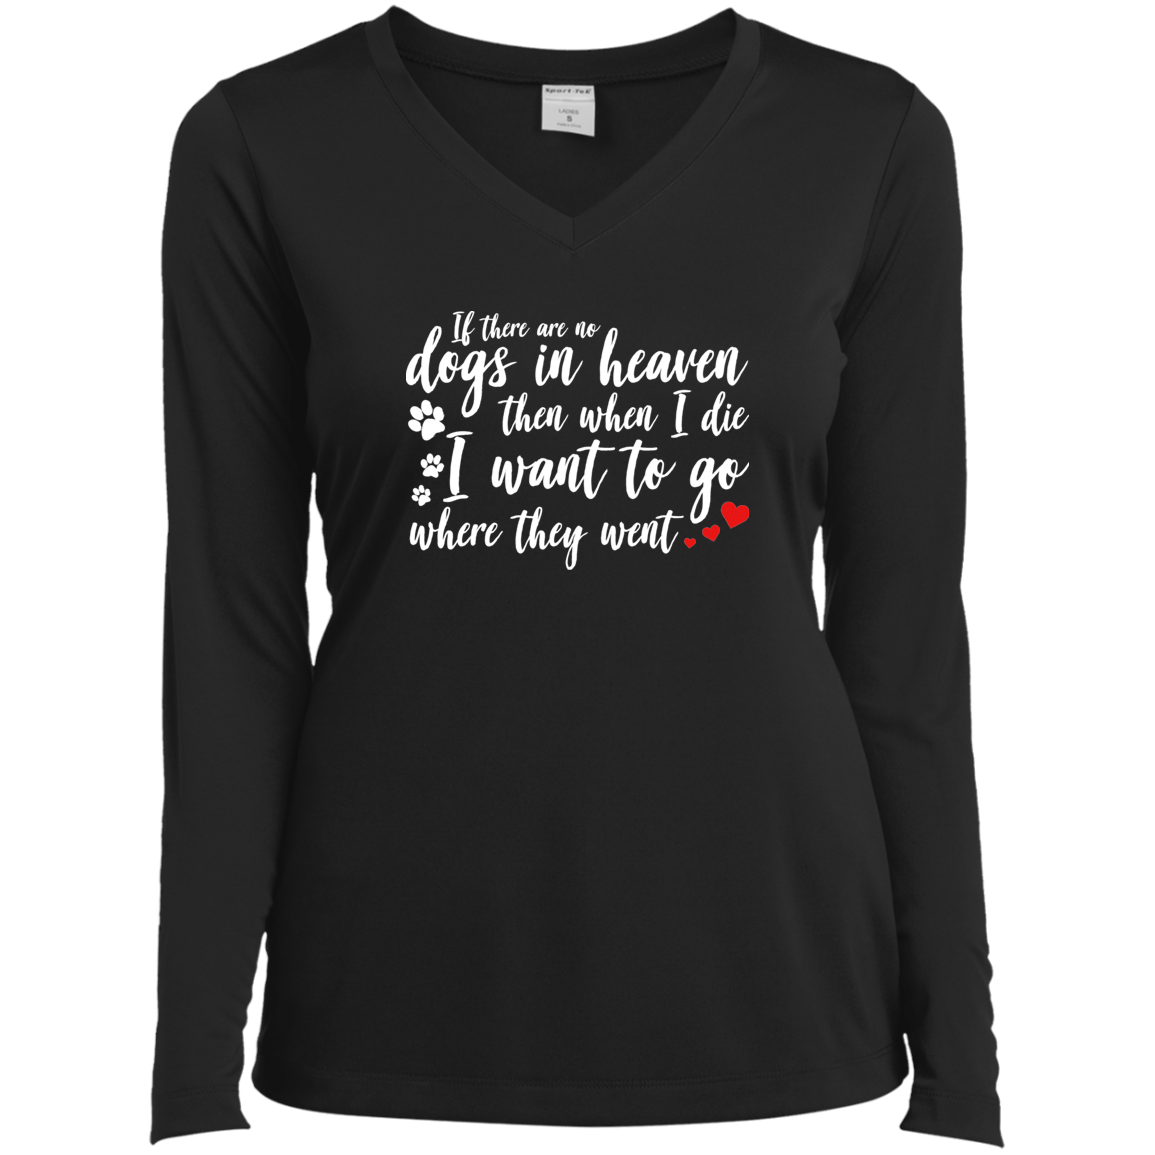 If There Are No Dogs In Heaven - Long Sleeve Ladies V Neck.